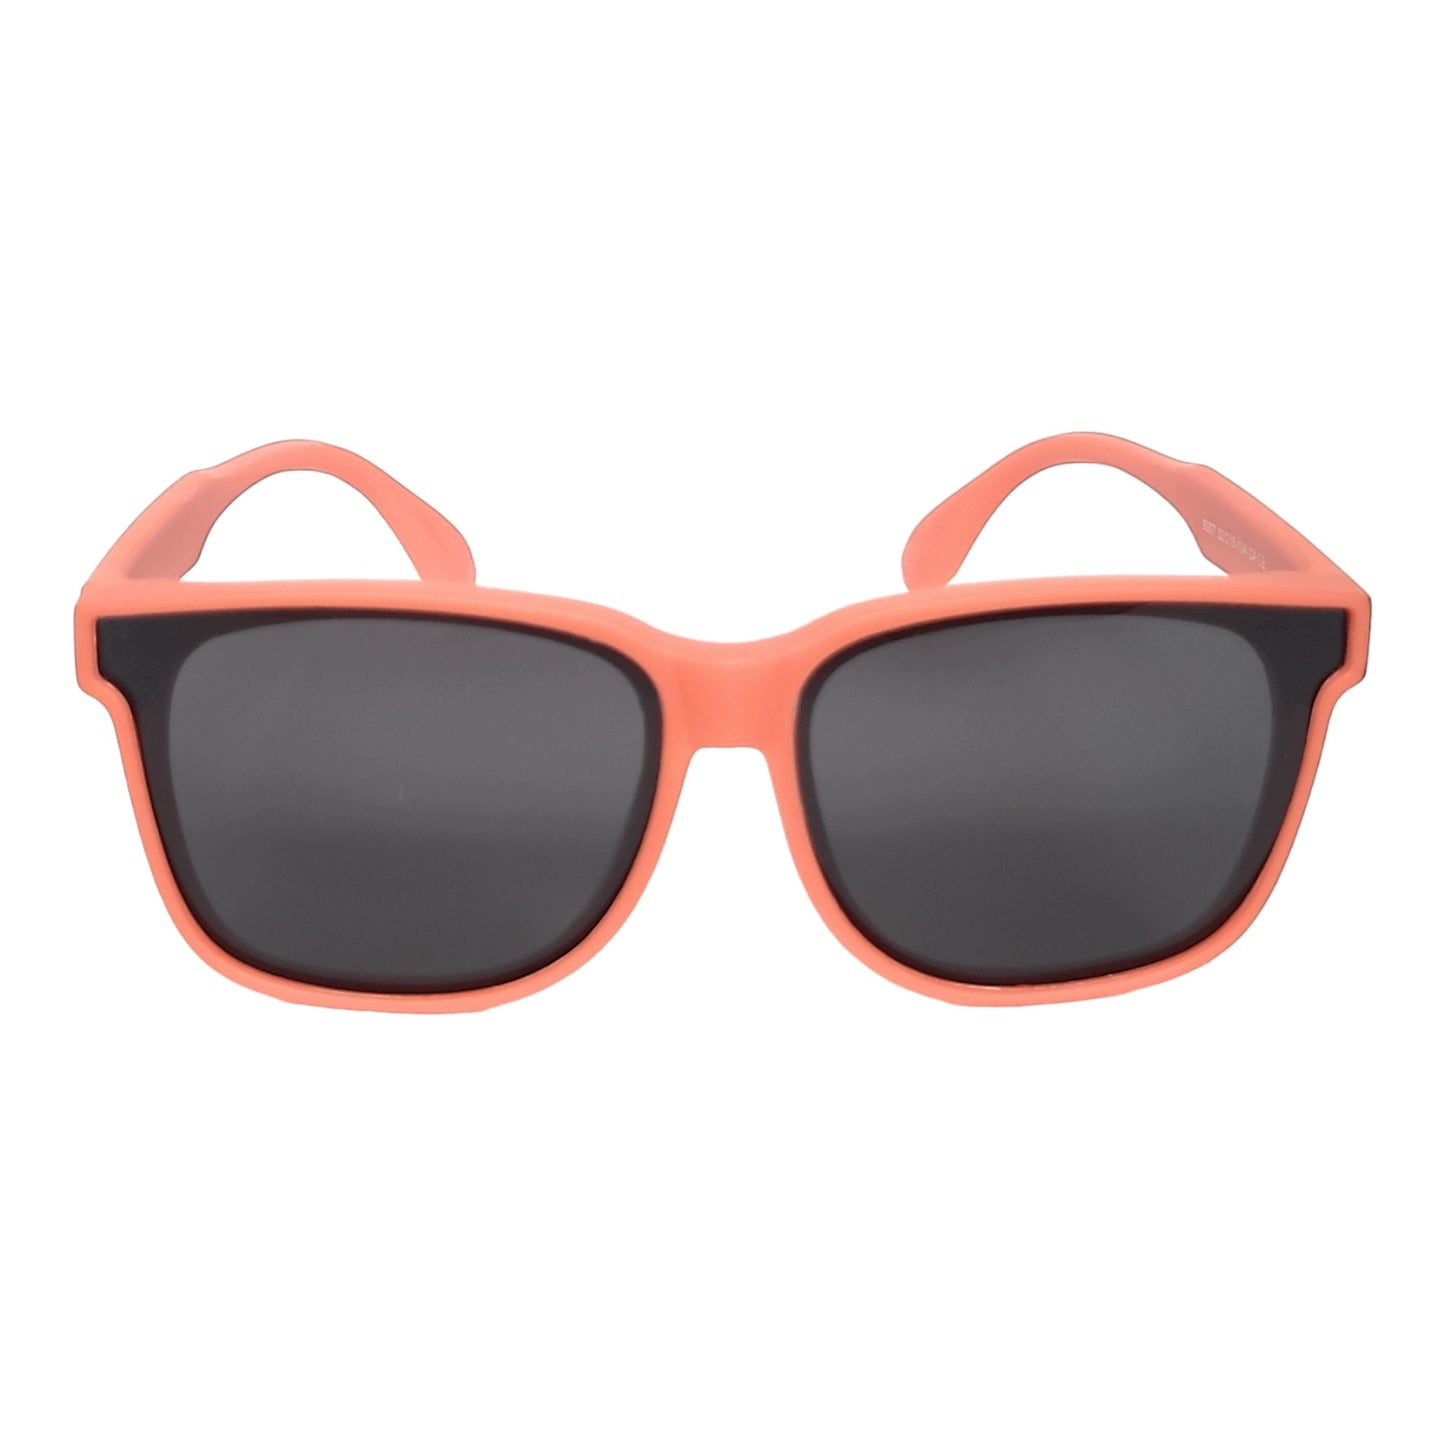 Kids Polarized Sunglasses for Children Age 4-9 Years Old, Girl or Boy  | affaires-9007-Orange